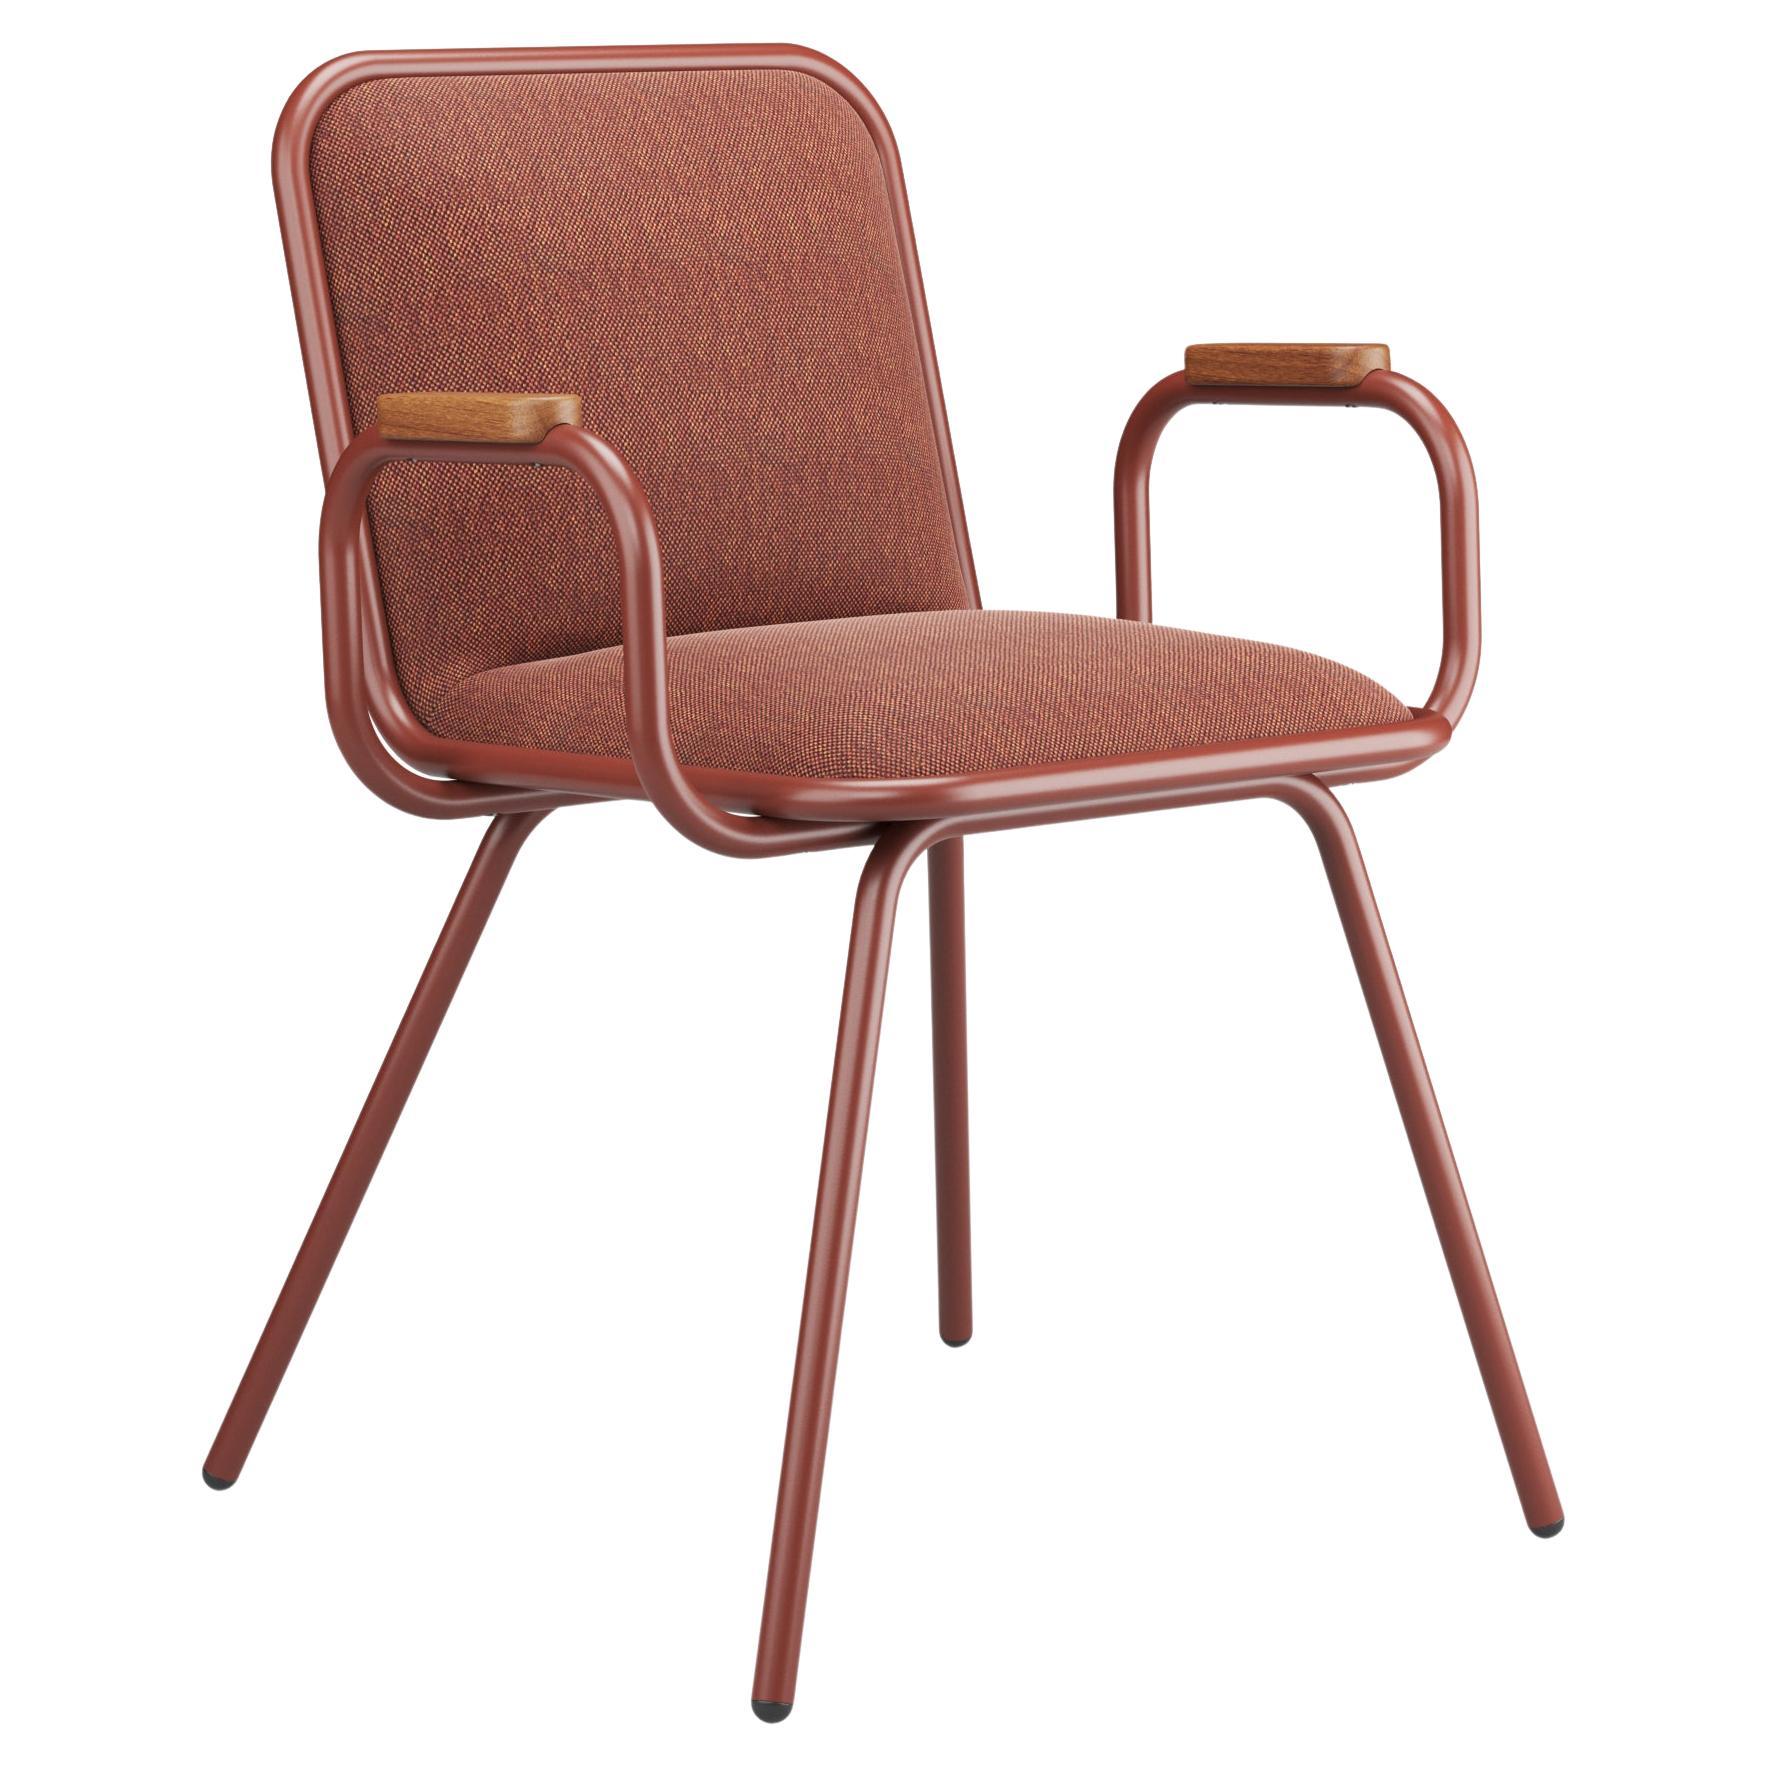 Hayche Dulwich with Armrest - Brown, UK, Made to Order